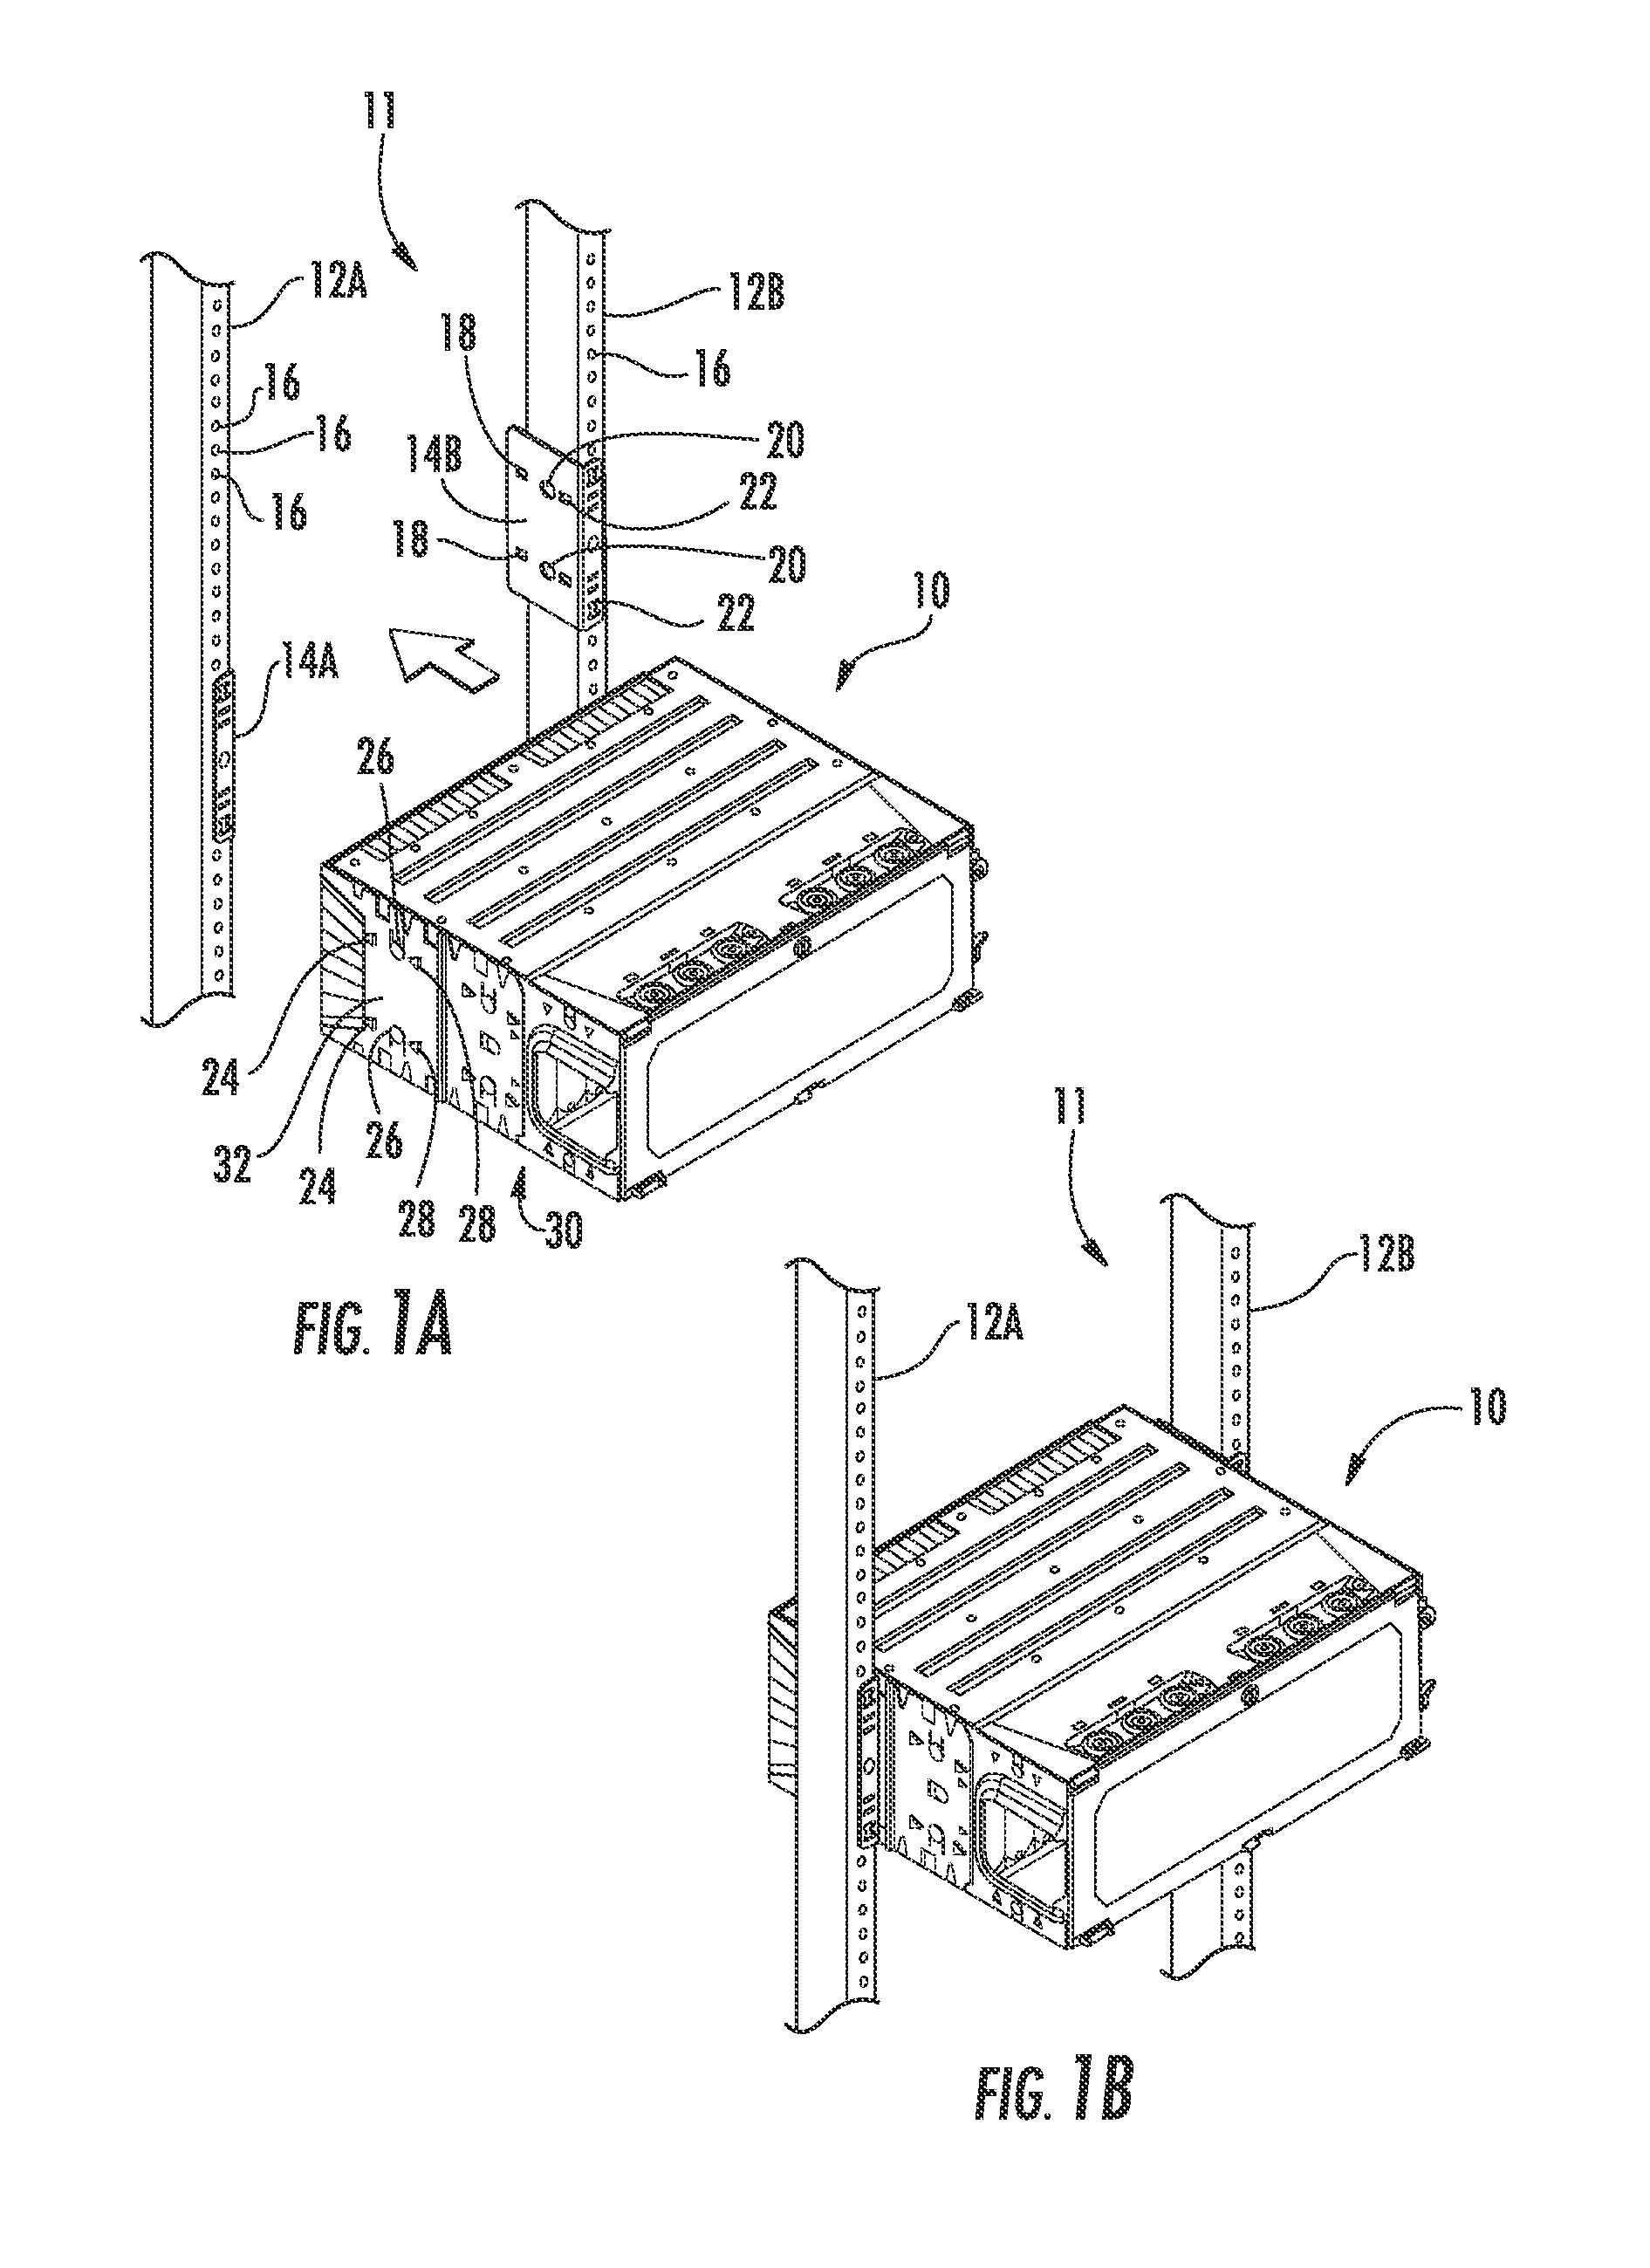 Removable fiber management sections for fiber optic housings, and related components and methods